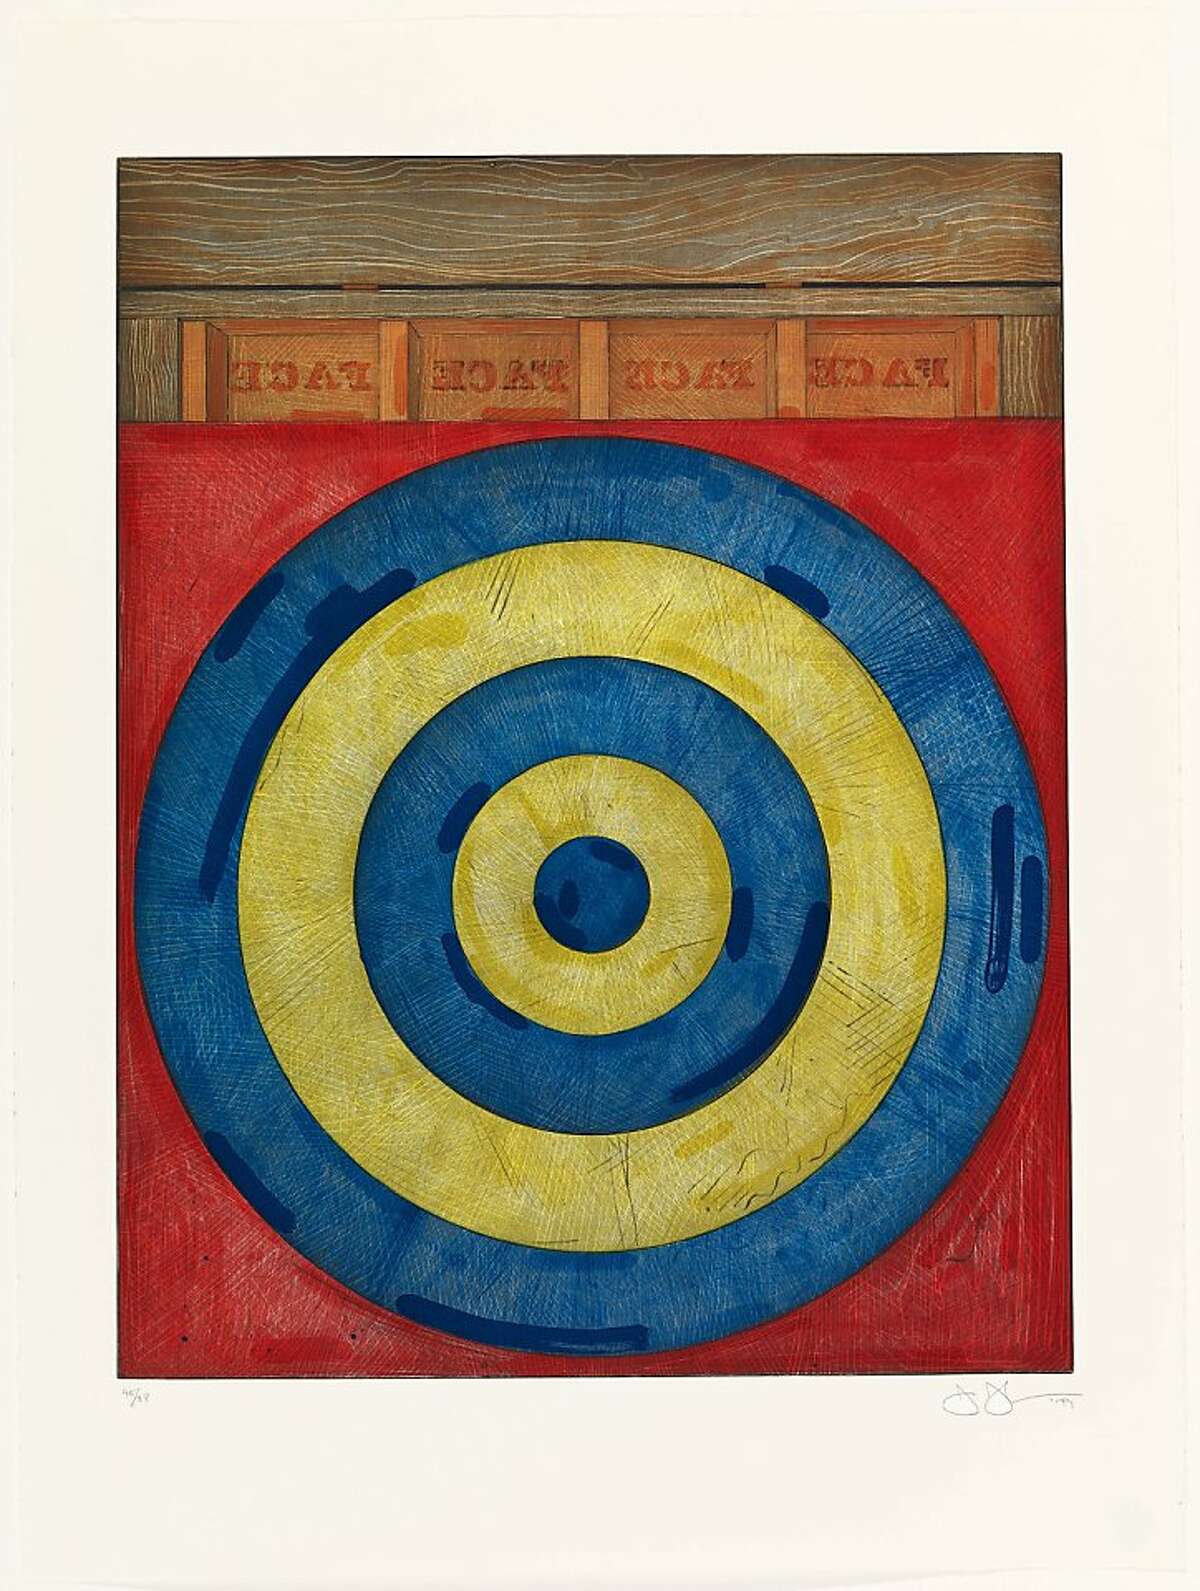 "Target with Four Faces" (1979) color etching, soft-ground etching, and aquatint (ed. 45/88) by Jasper Johns 30" x 22" in. Published by Petersburg Press Fine Arts Museums of San Francisco, Anderson Graphic Arts Collection, gift of the Harry W. and Mary Margaret Anderson Charitable Foundation